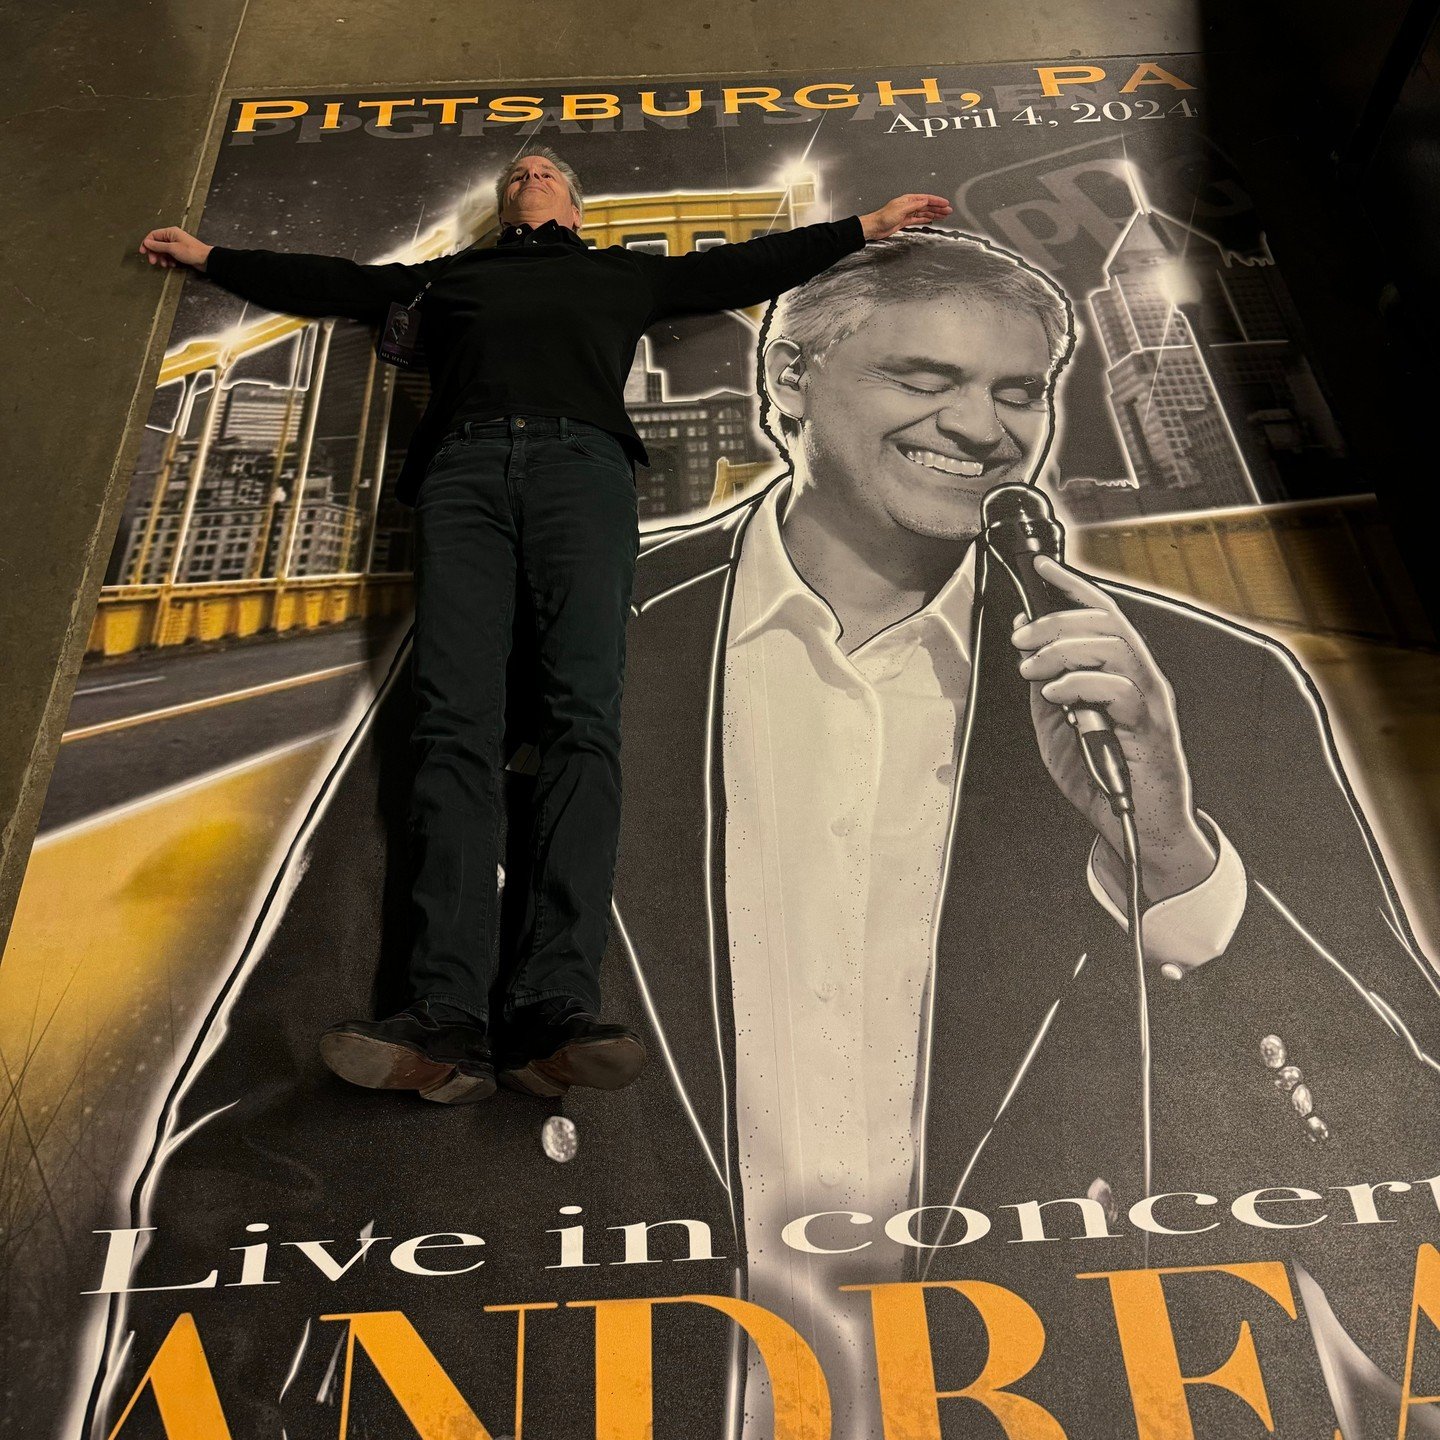 And the Andrea Bocelli tour begins... Hello Pittsburgh! @andreabocelliofficial #maestro #pittsburgh #conductor #orchestra #maestromercurio